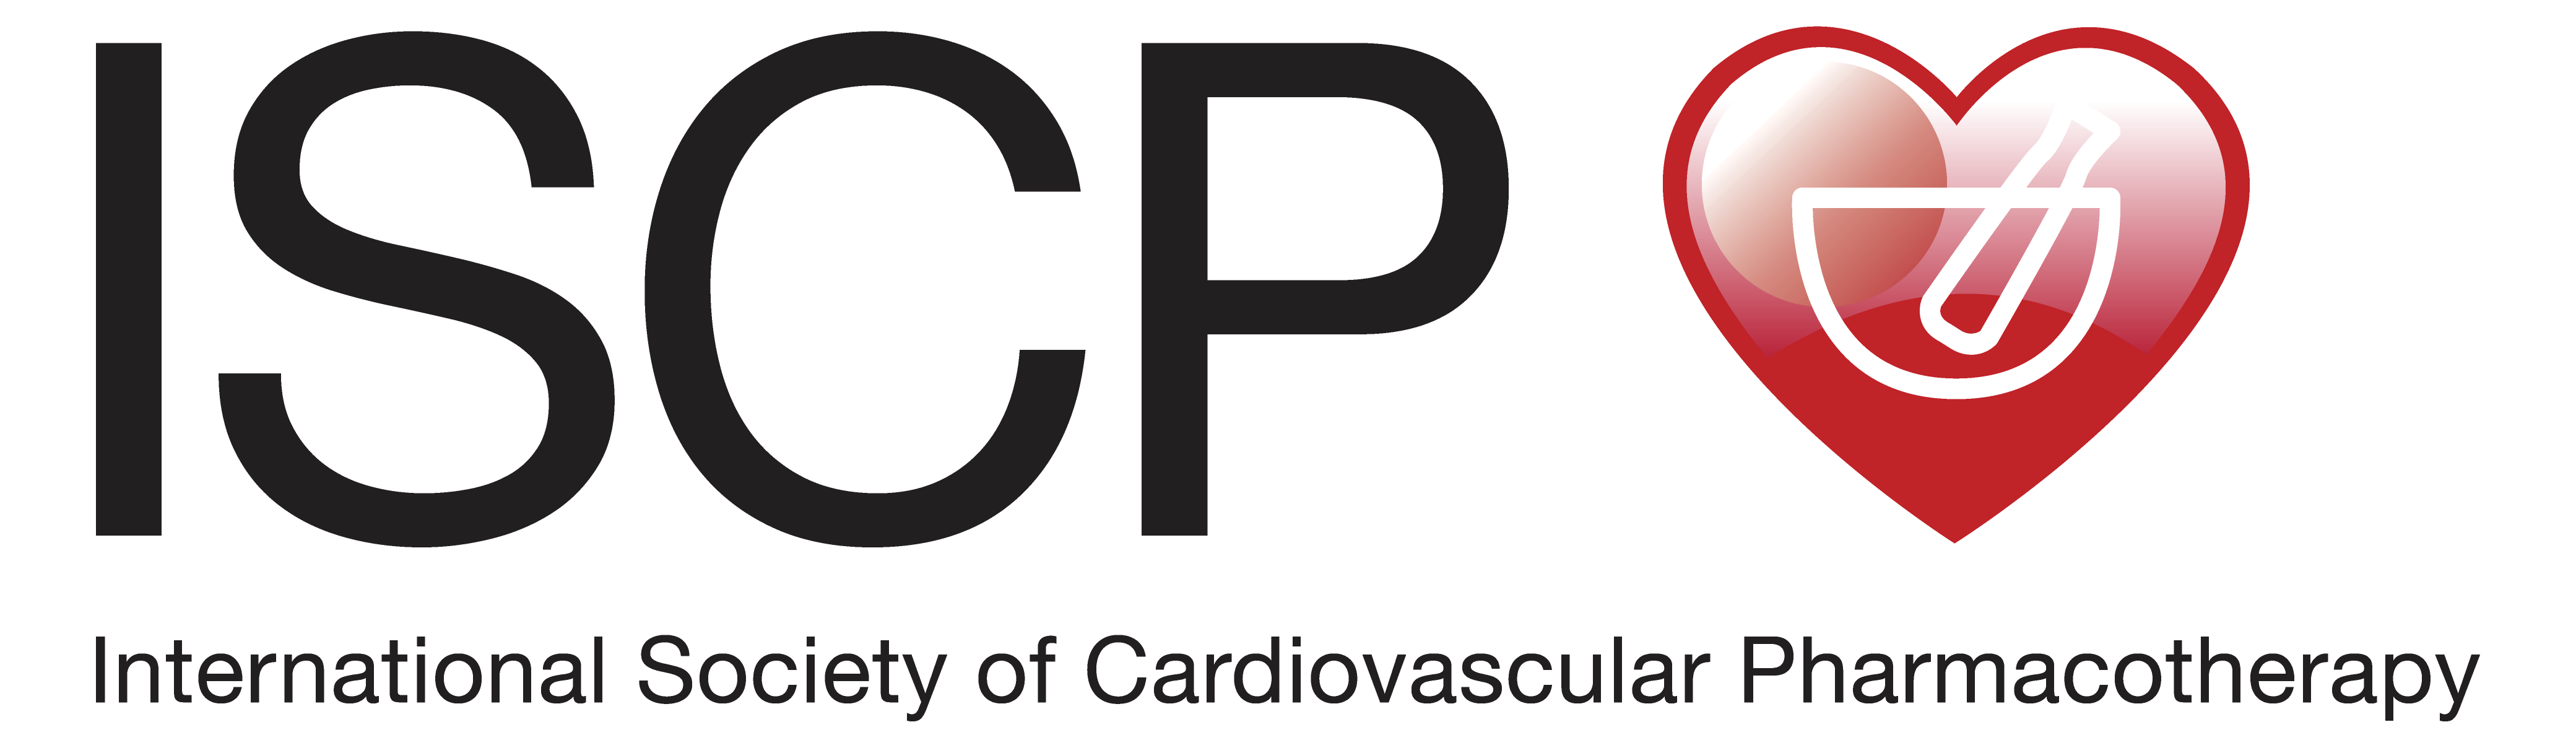 International Society of Cardiovascular pharmacotherapy annual scientific meeting